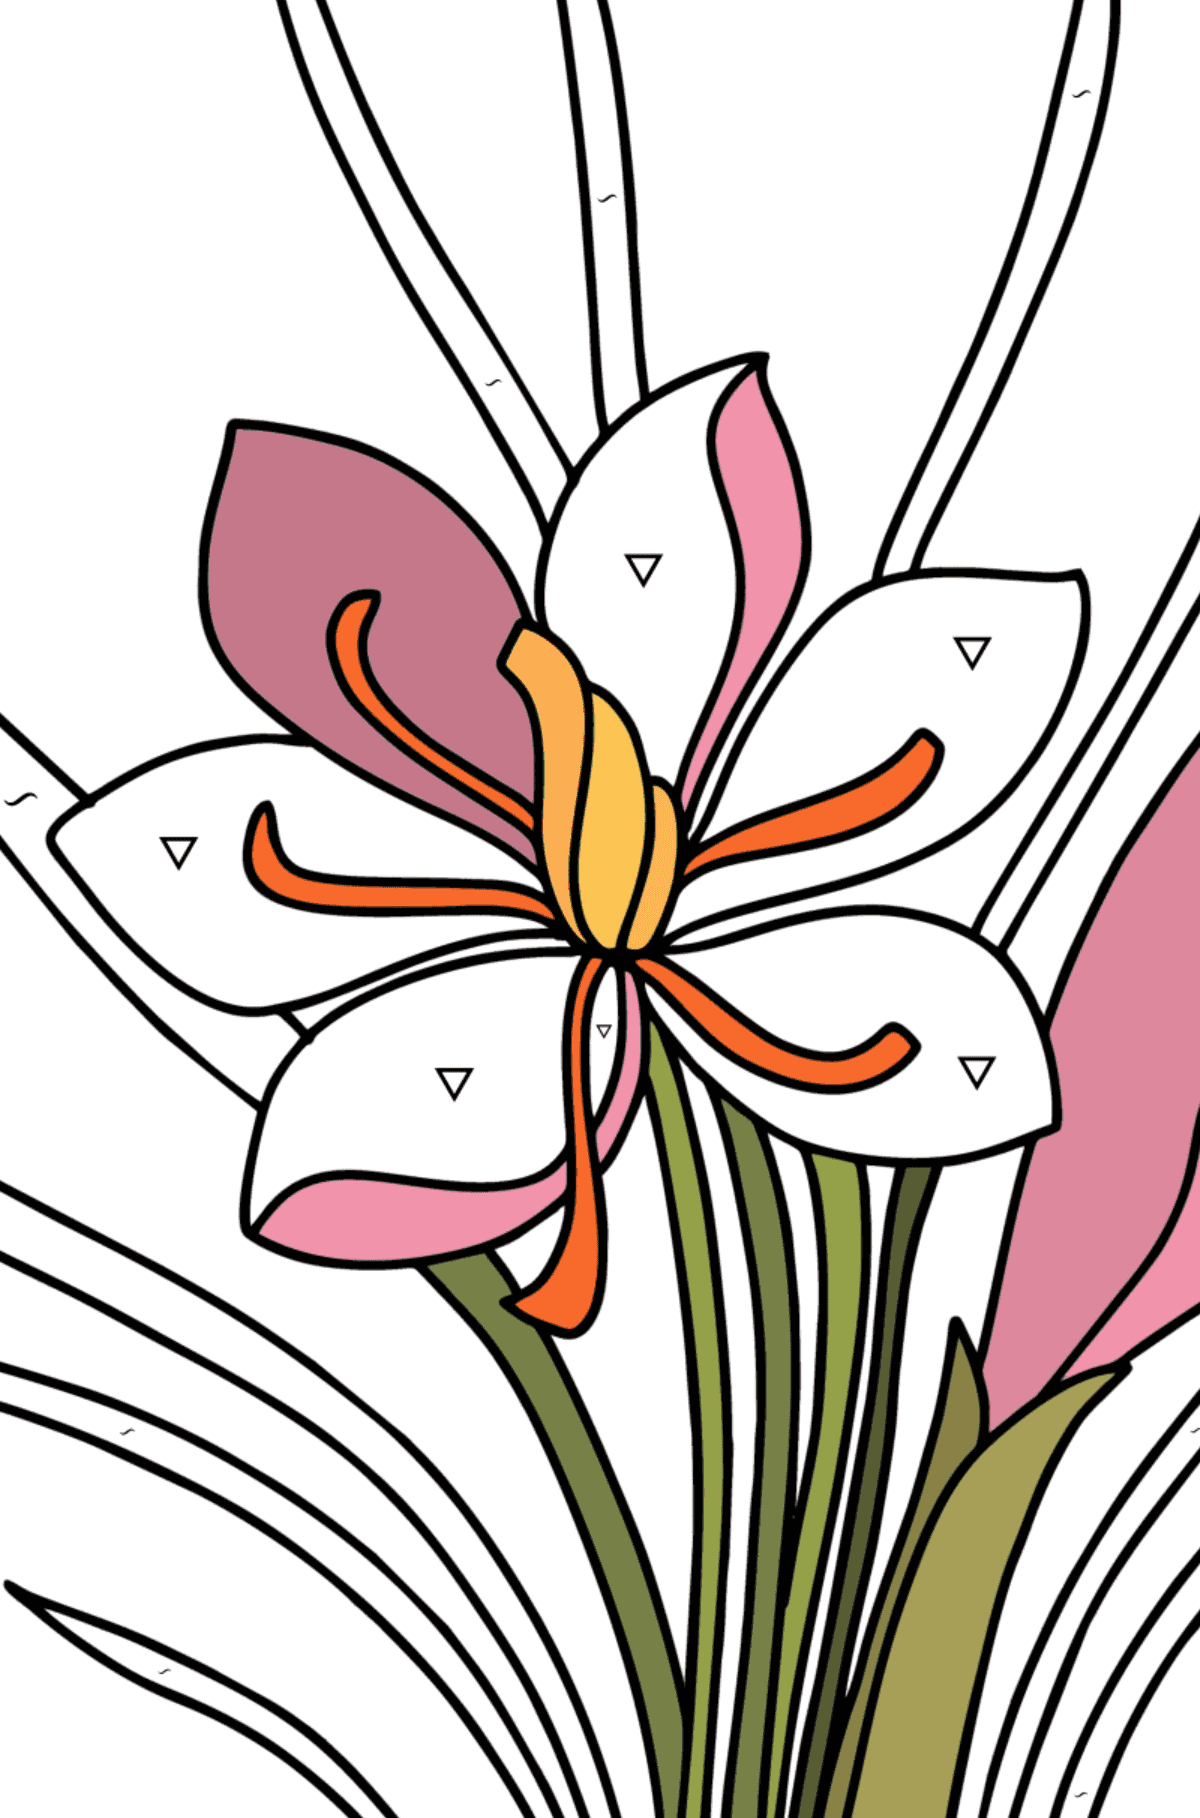 Crocus coloring page - Coloring by Symbols for Kids